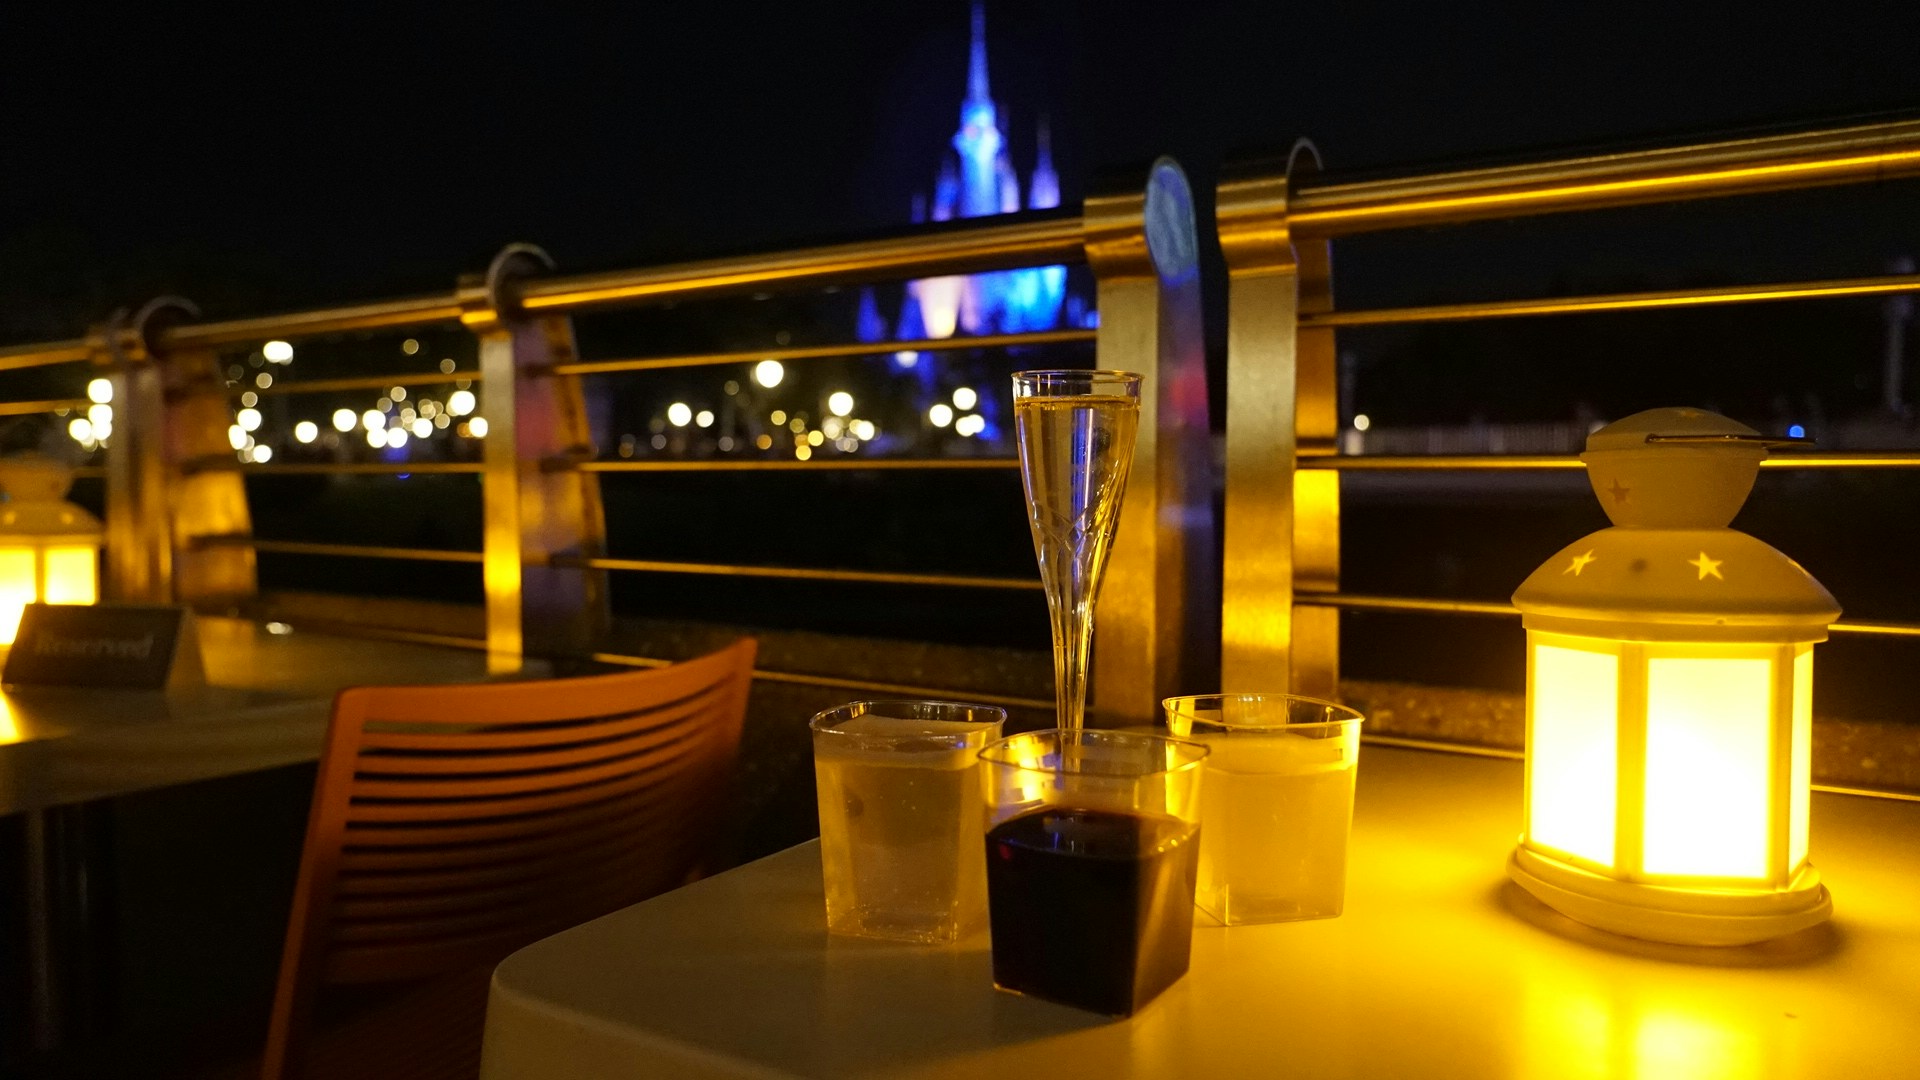 VnXoxZnm tomorrowland terrace dessert party with alcohol happily ever after magic kingdom feb 2020 38.JPG?auto=compress%2Cformat&ixlib=php 1.2